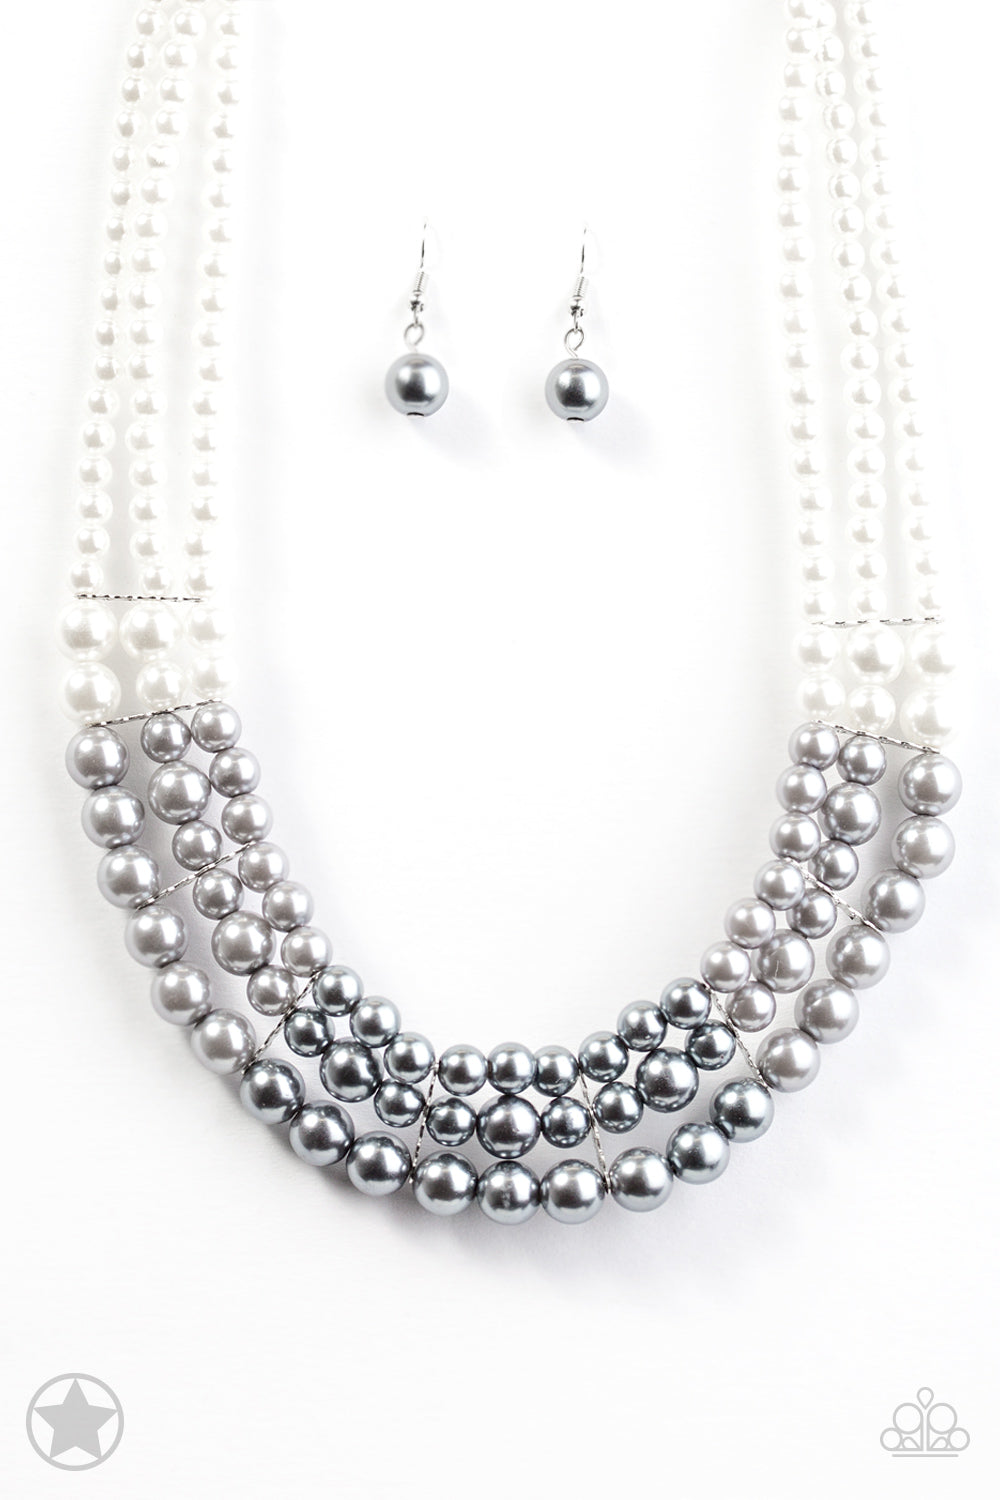 Paparazzi Blockbuster Necklaces - Lady In Waiting - Silver